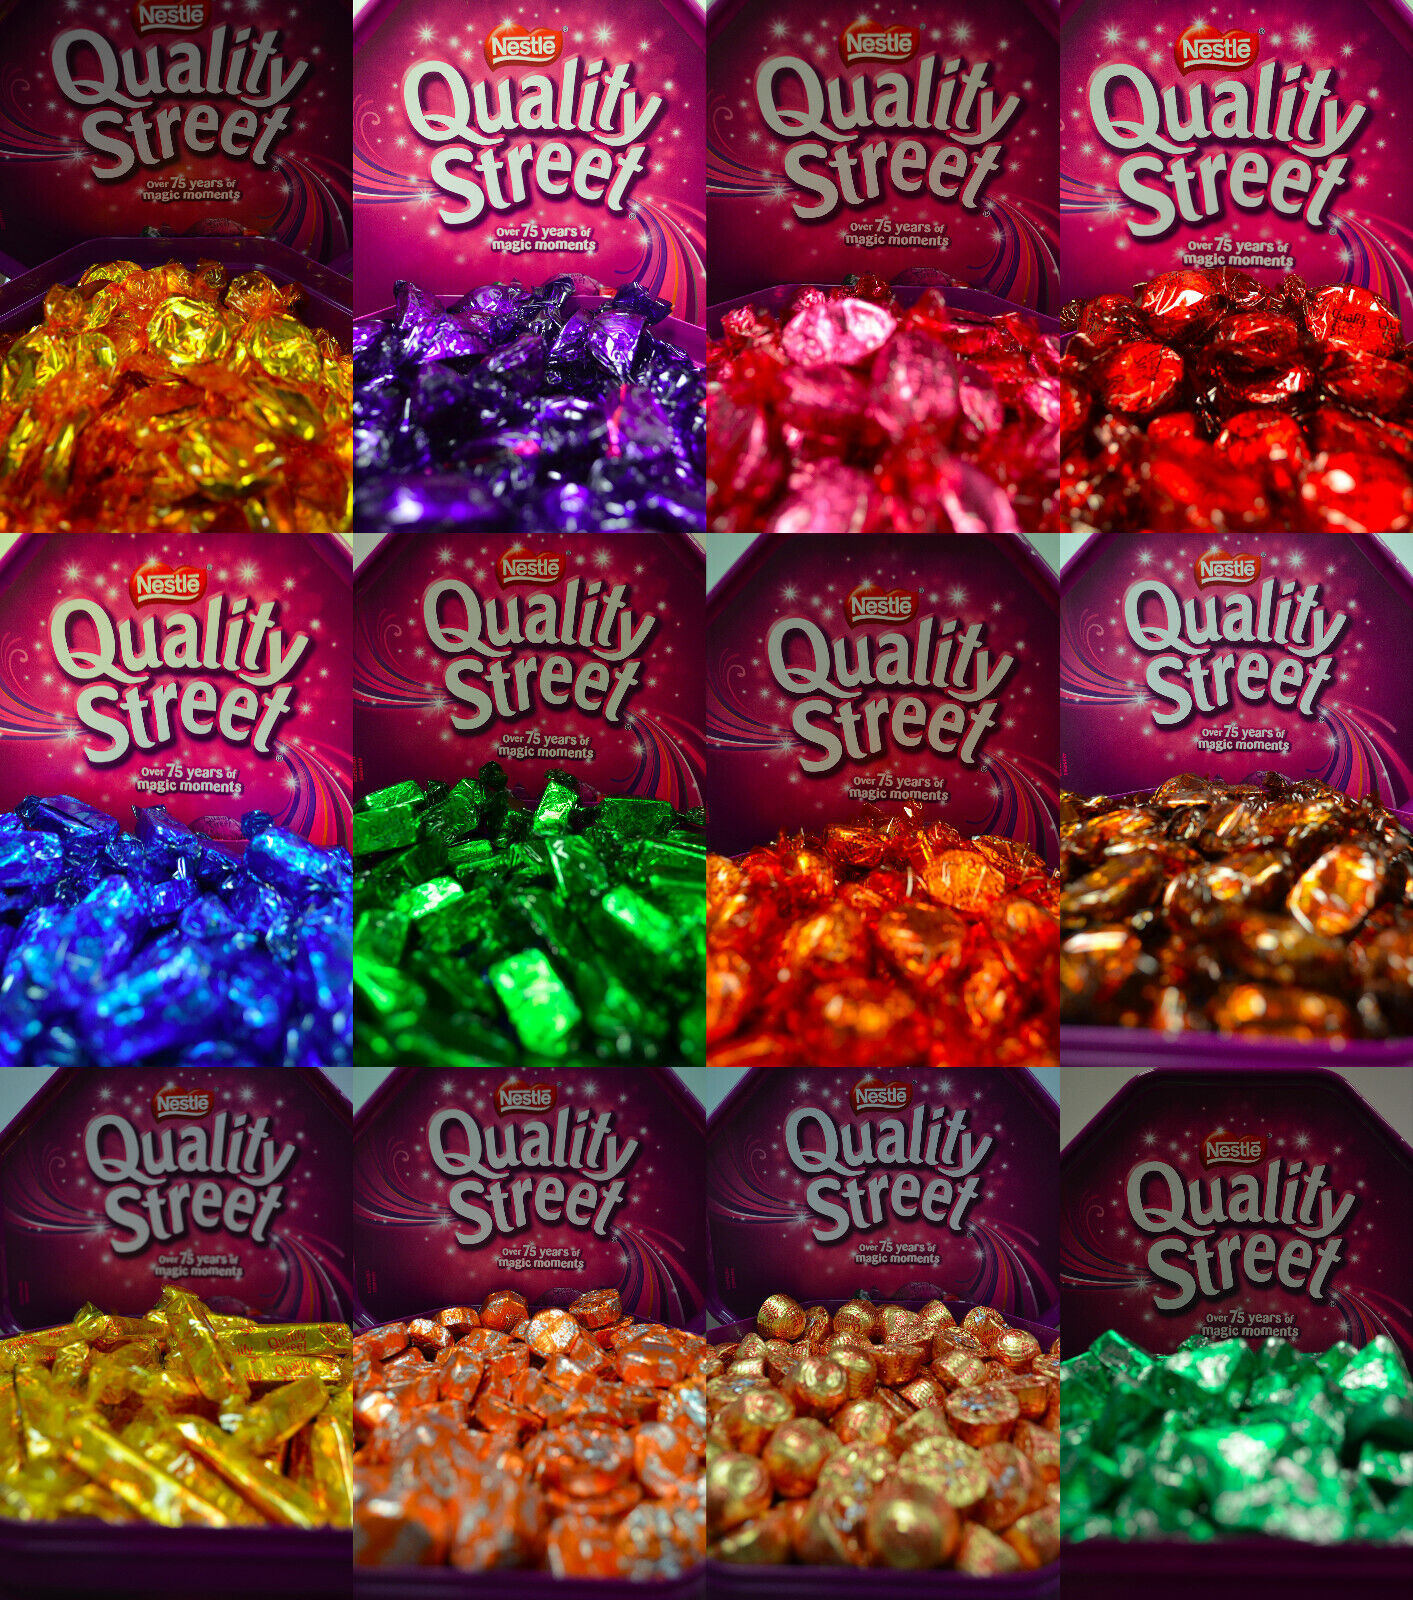 Quality Street - Container of 100 - All sweets the same - Free